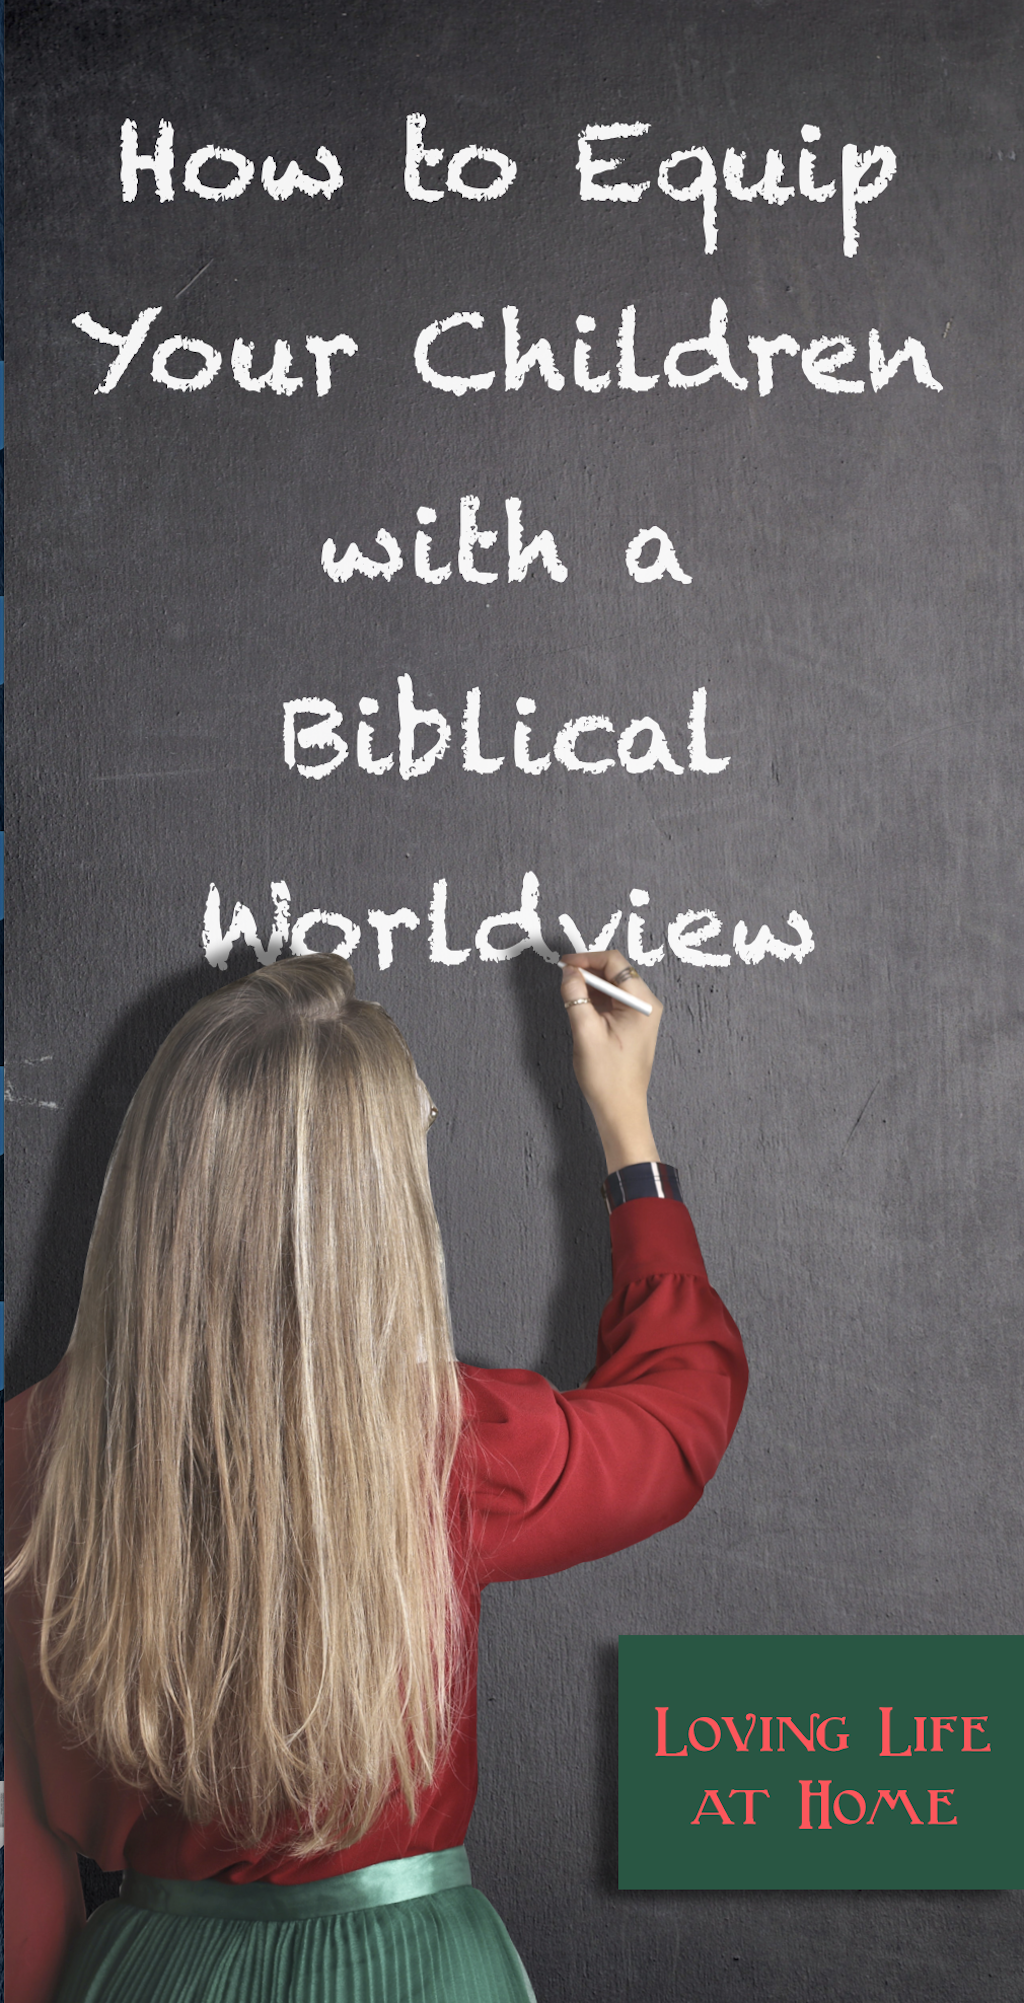 Give Your Children a Biblical Worldview